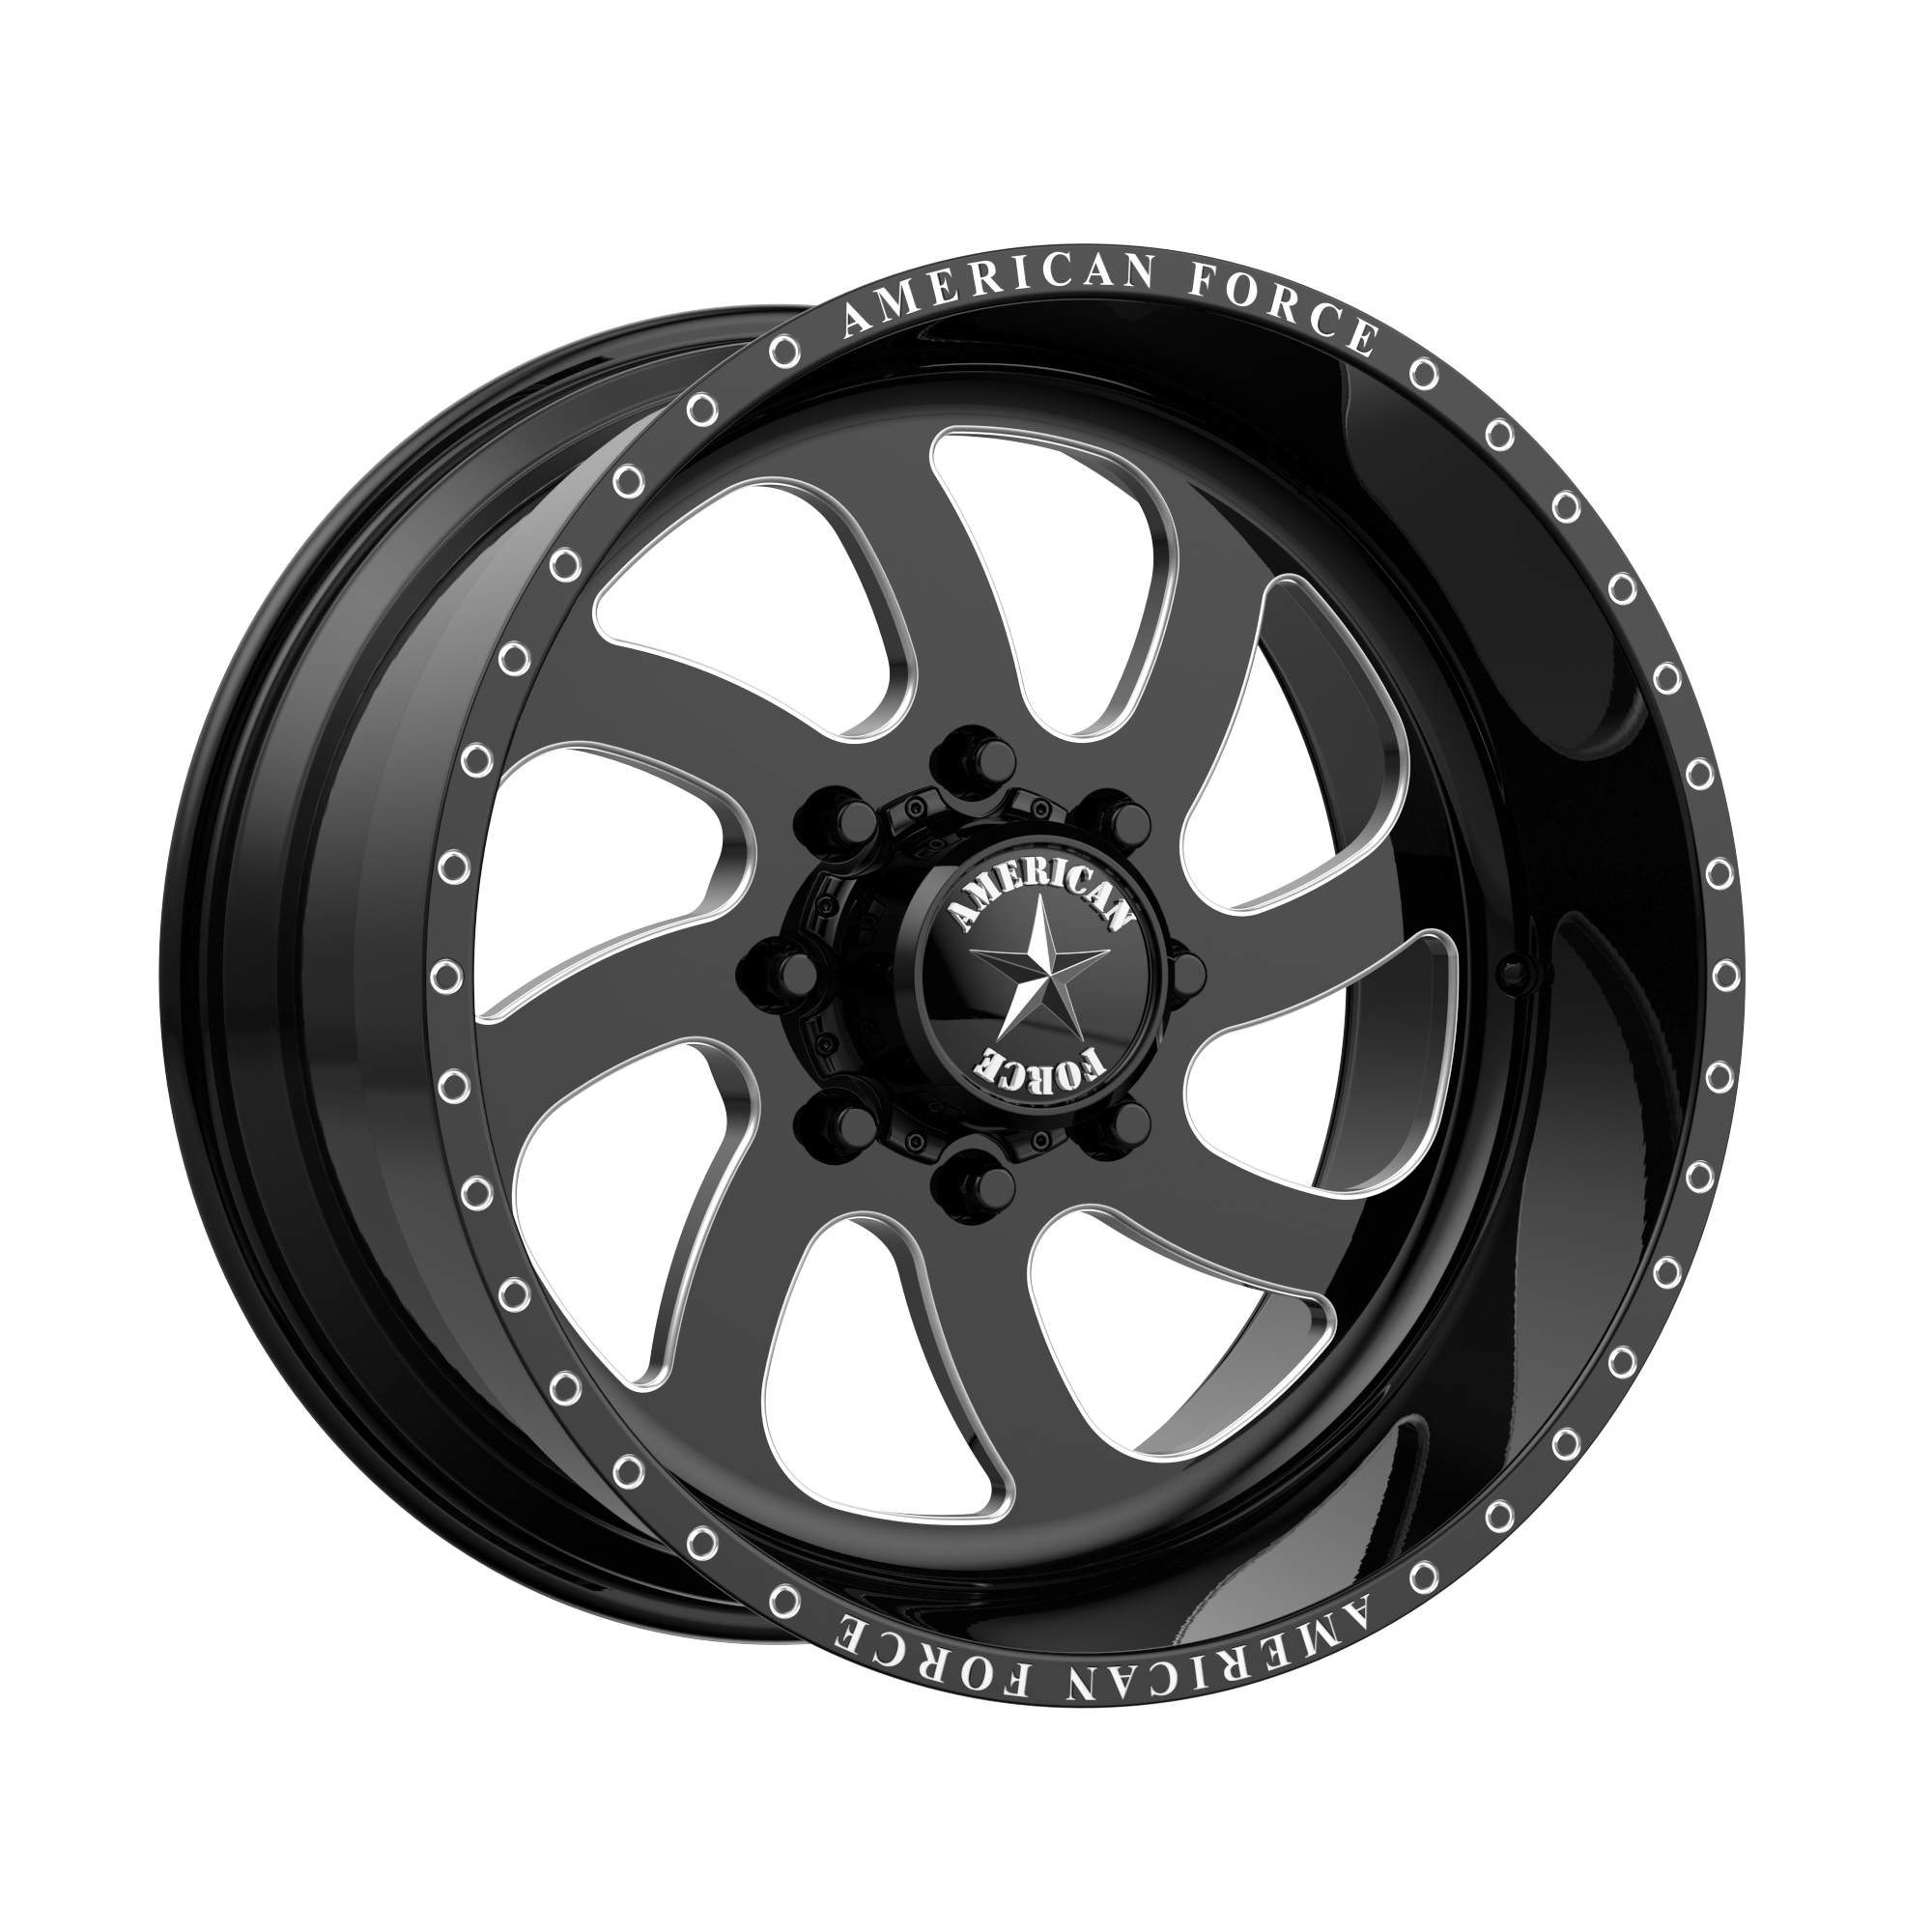 BLADE SS 20x12 6x135.00 GLOSS BLACK MACHINED (-40 mm) - Tires and Engine Performance